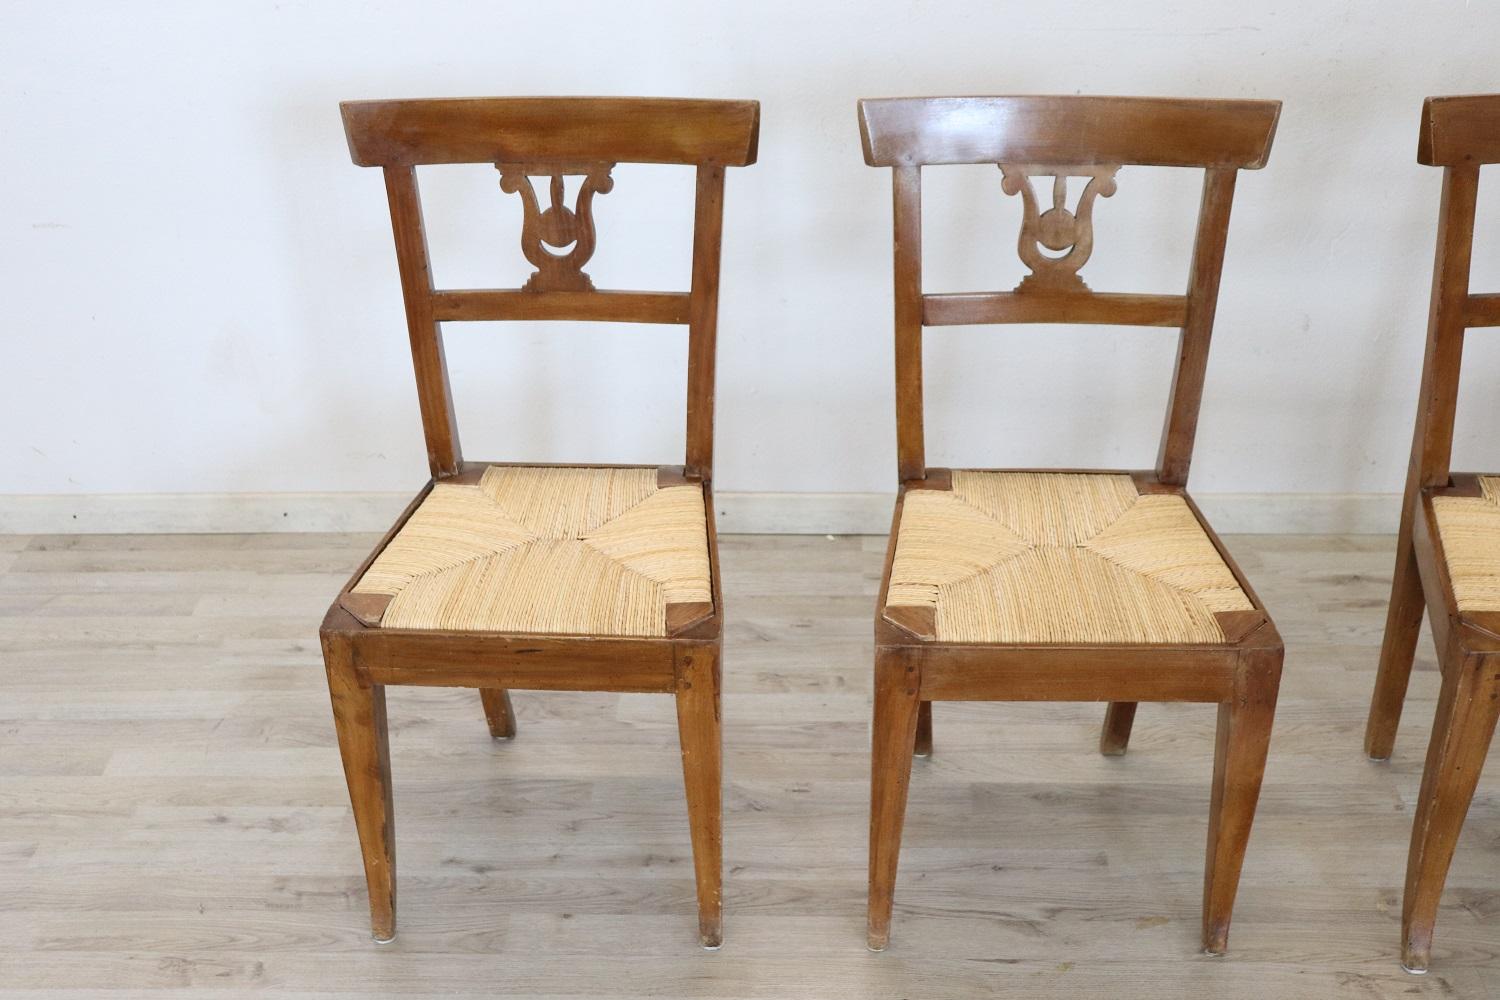 Series of four refined early 19th century authentic Italian Empire walnut wood four chairs. Refined decoration the back is carved in the shape of a lyre. The legs are very elegant straight. The seat is wide and comfortable rustic in handwoven straw